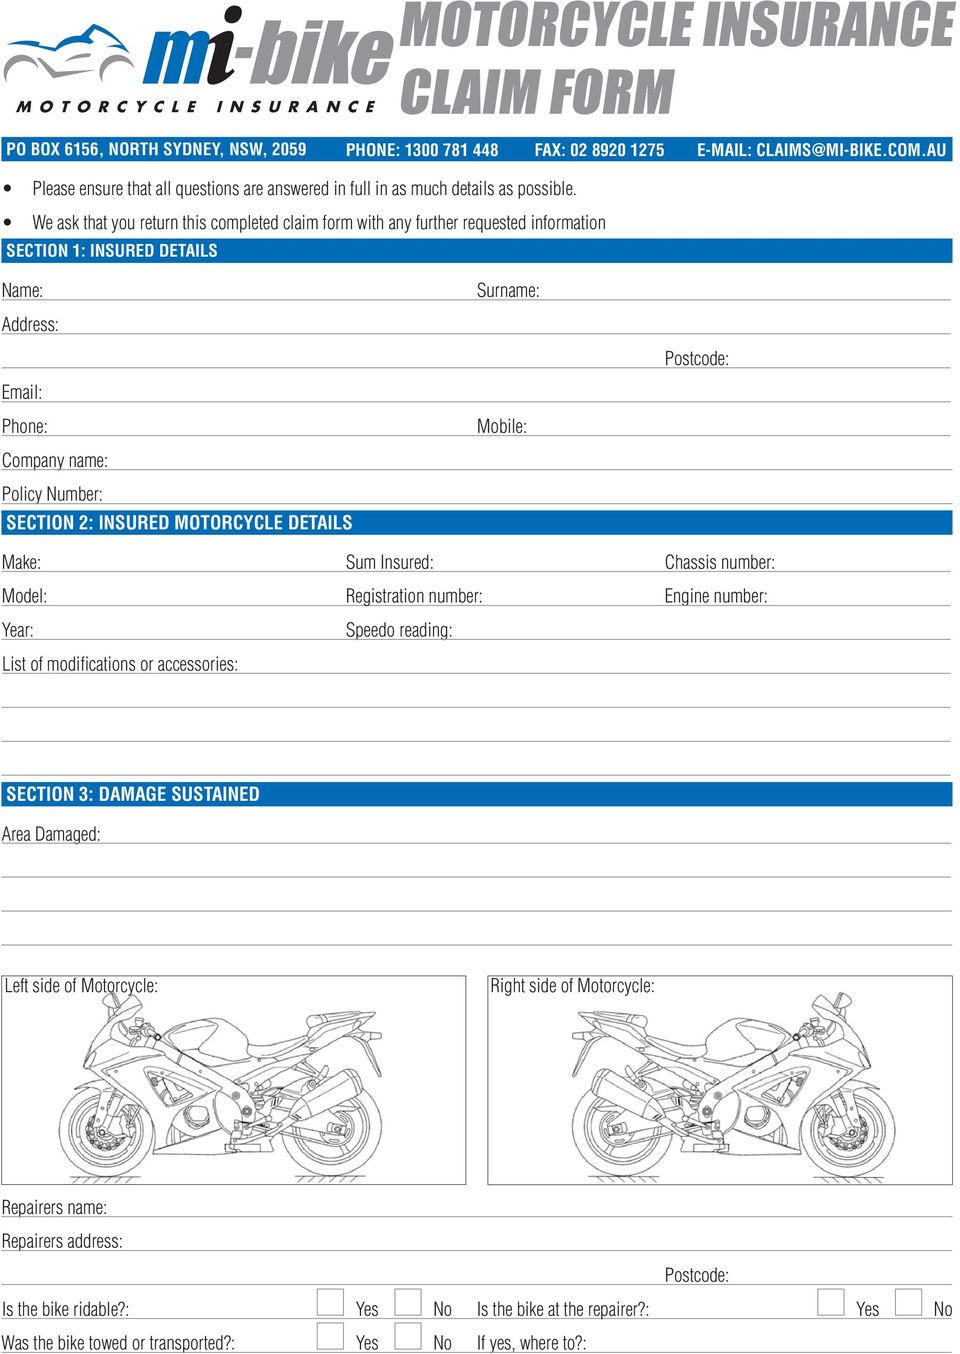 Motorcycle Insurance Claim Form Pdf Free Download within measurements 960 X 1354